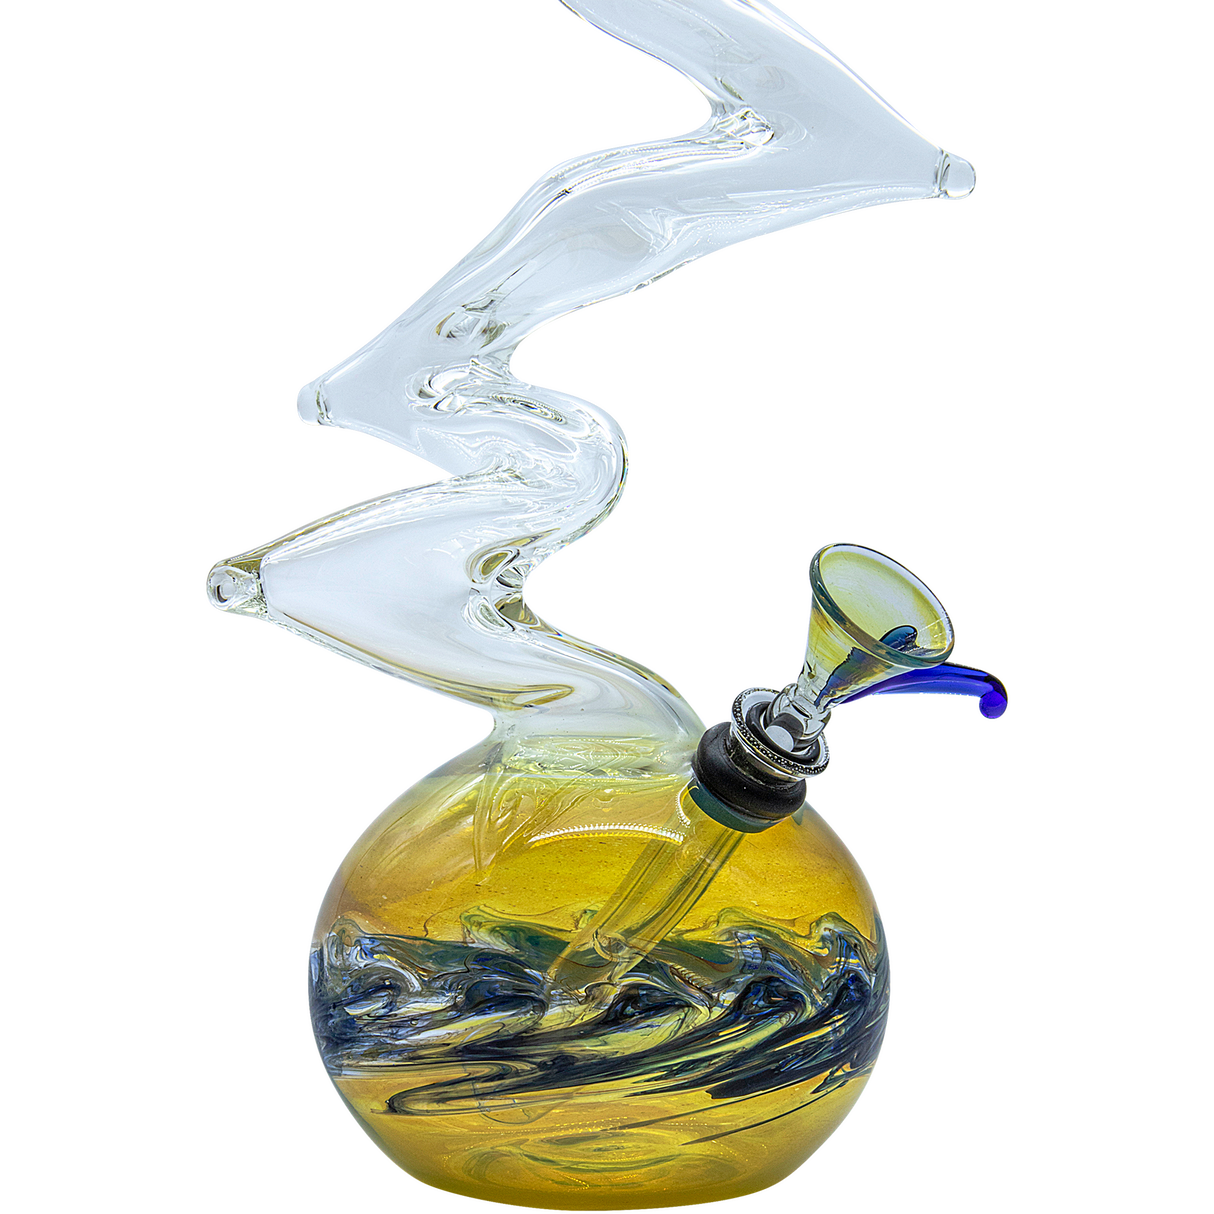 LA Pipes "Switchback" Bubble Base Bong with a twisted neck design and colorful accents